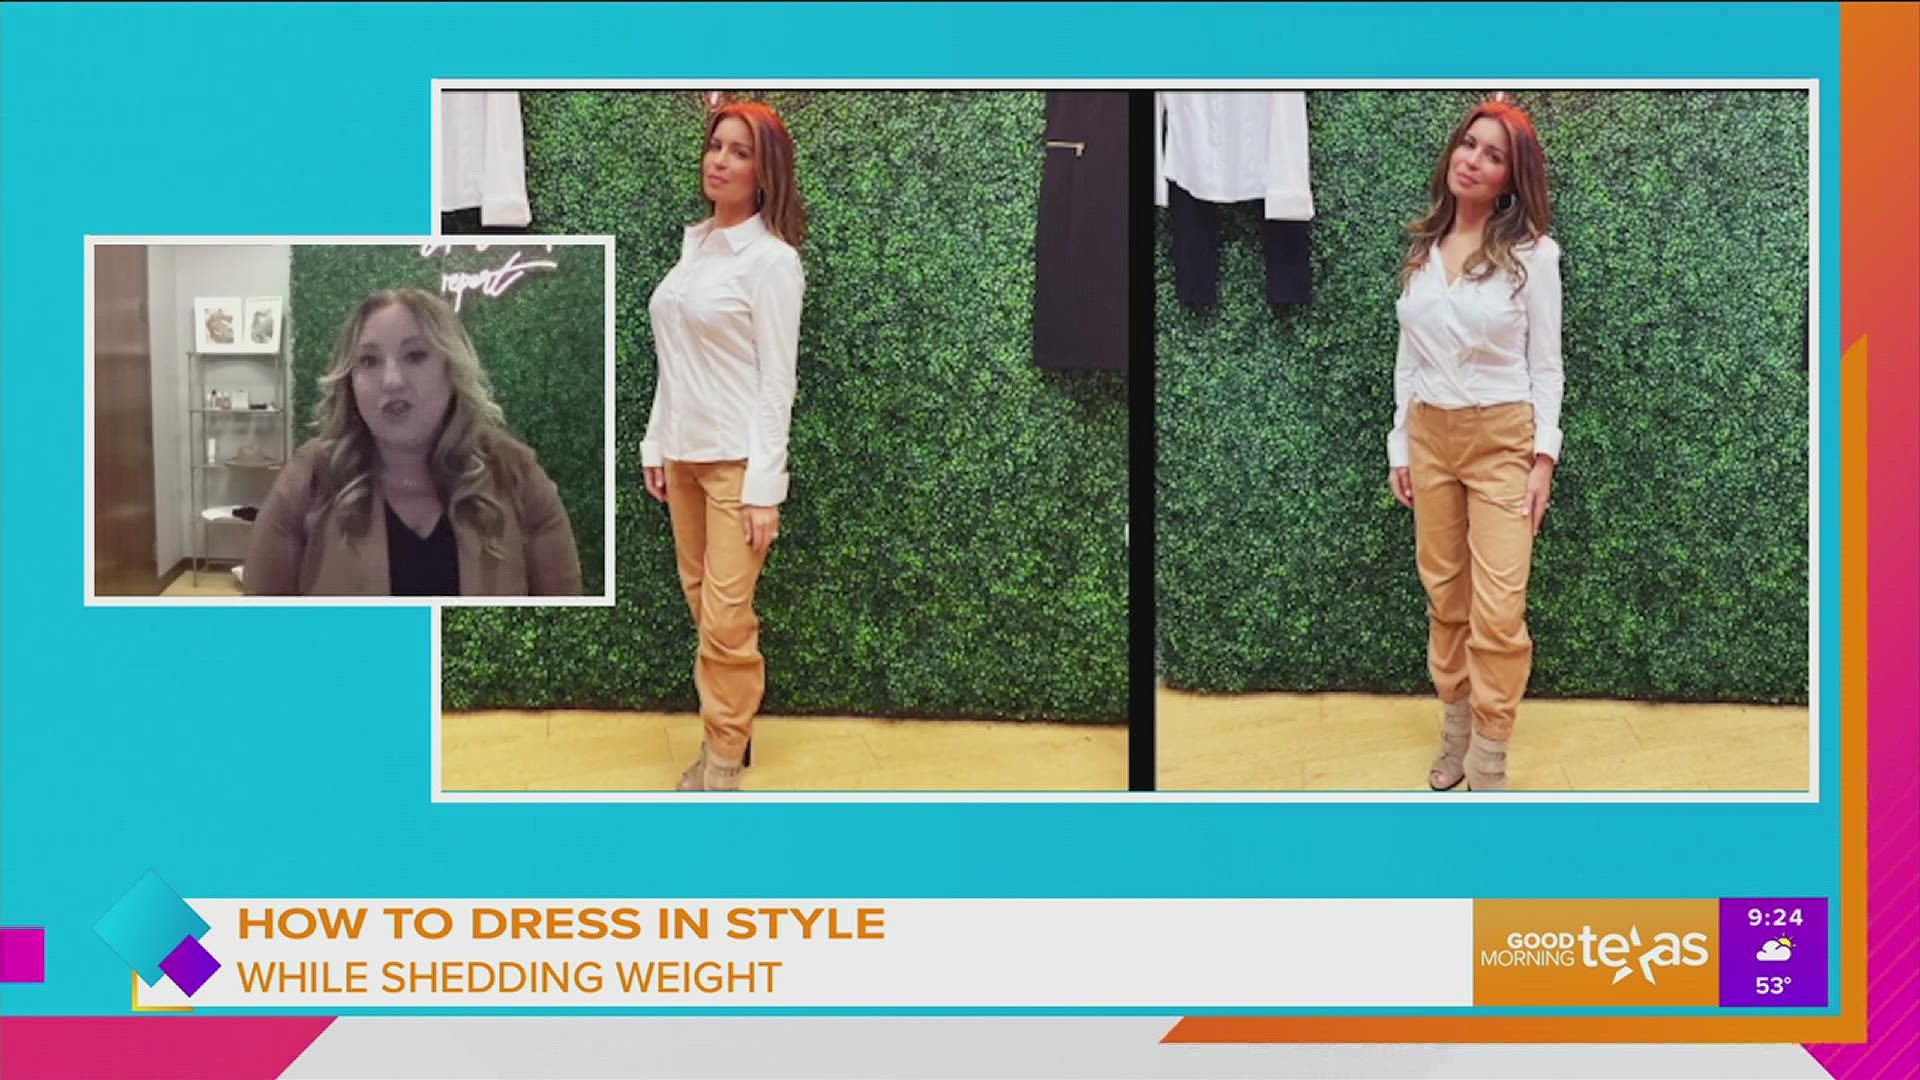 Texas Fashion Stylist of the Year, Jules Aldaz, is here to show us how you can still dress in style while shedding the weight.